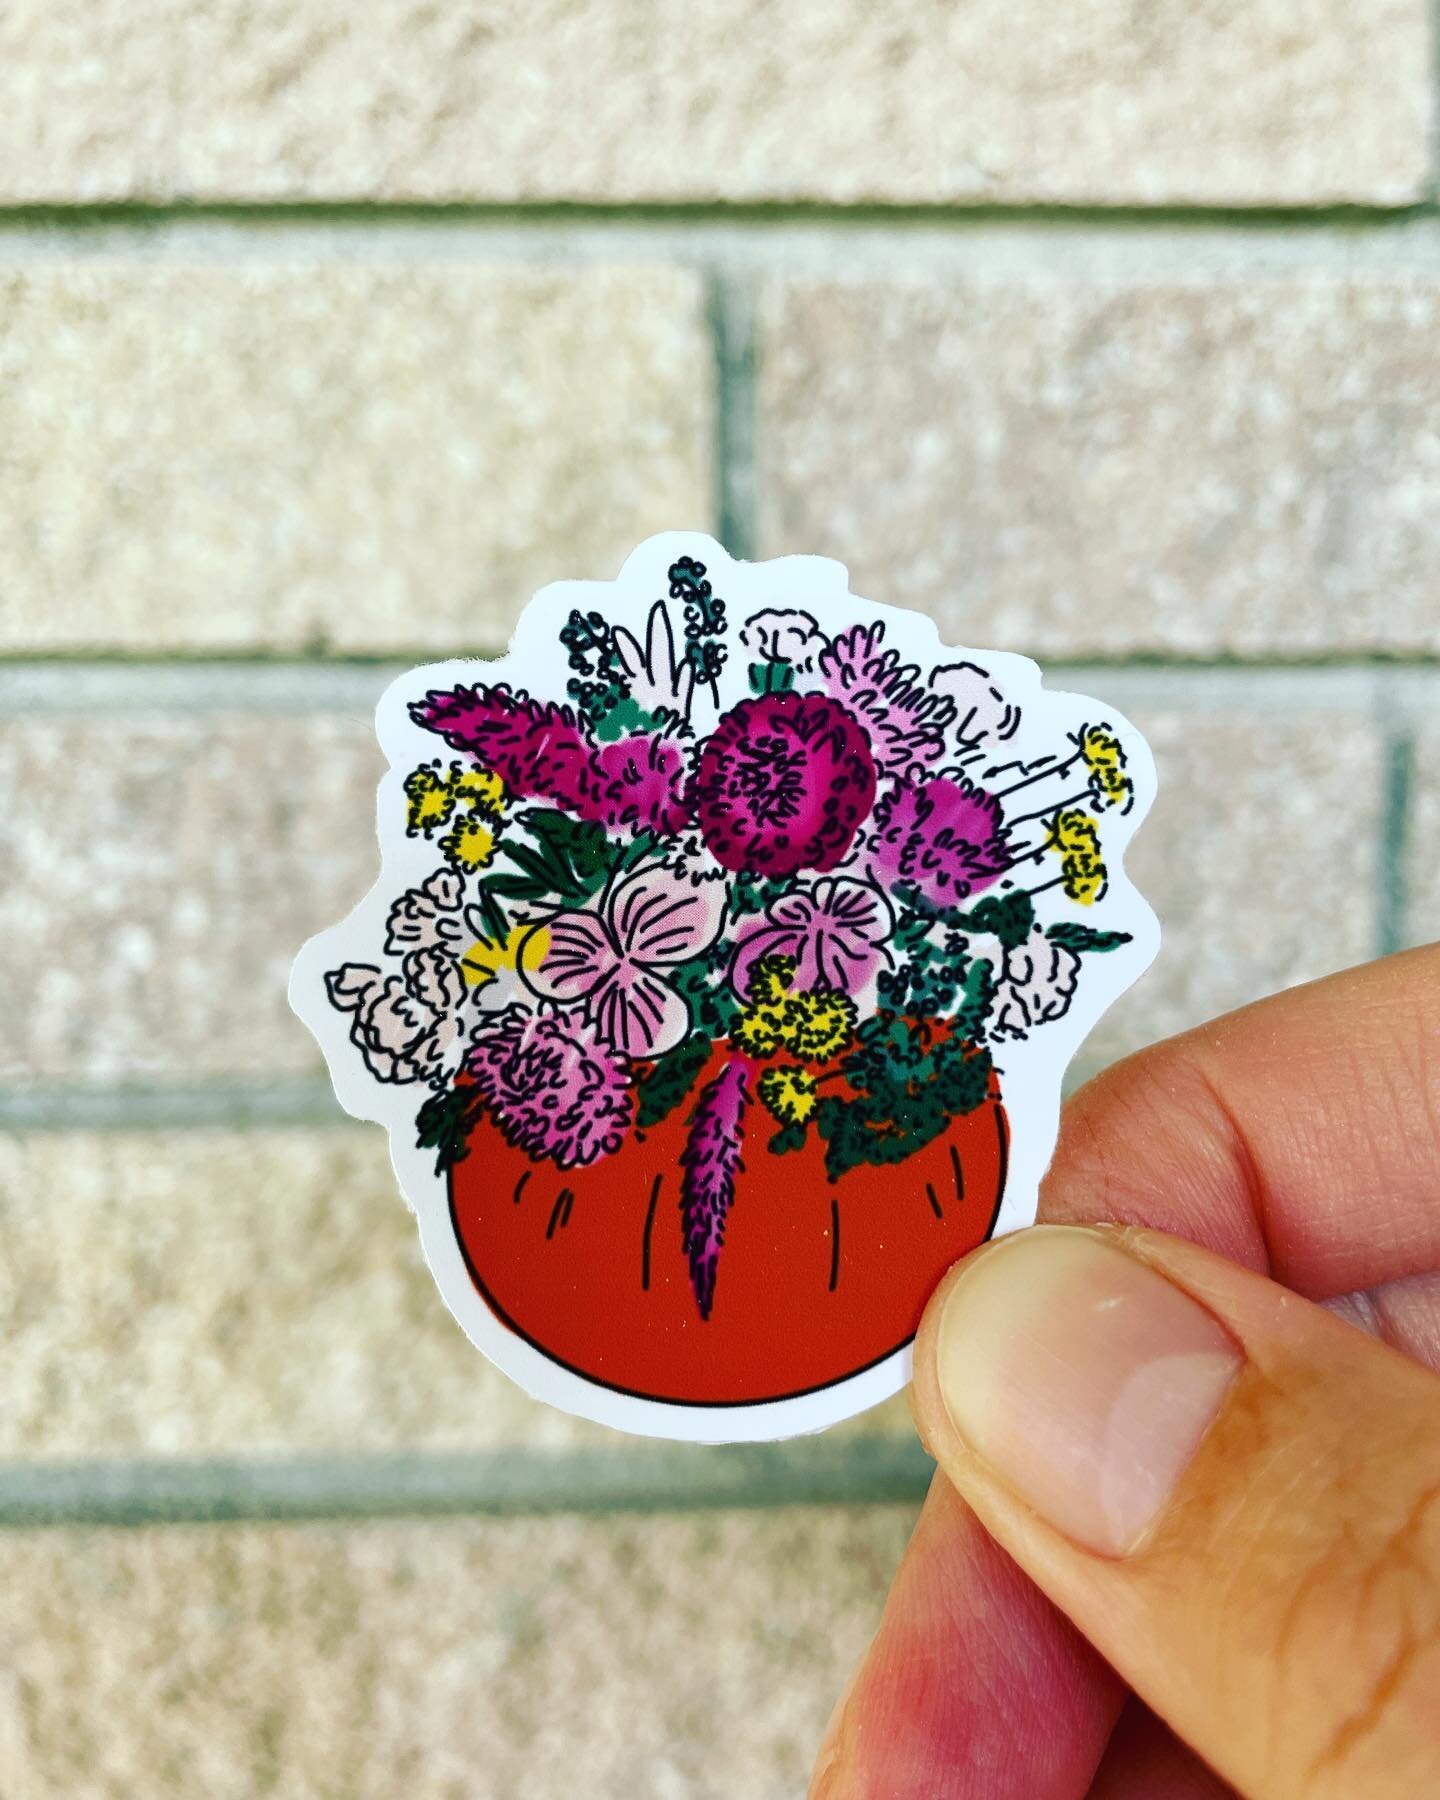 when your favorite illustrator makes you these stickers just because&hellip;

happy pumpkin days, y&rsquo;all. 🎃🍂🍁

order your pumpkin stickers and your dried floral pumpkins before they&rsquo;re sold out! 

#periwinkleflowerco #slowflowers #local